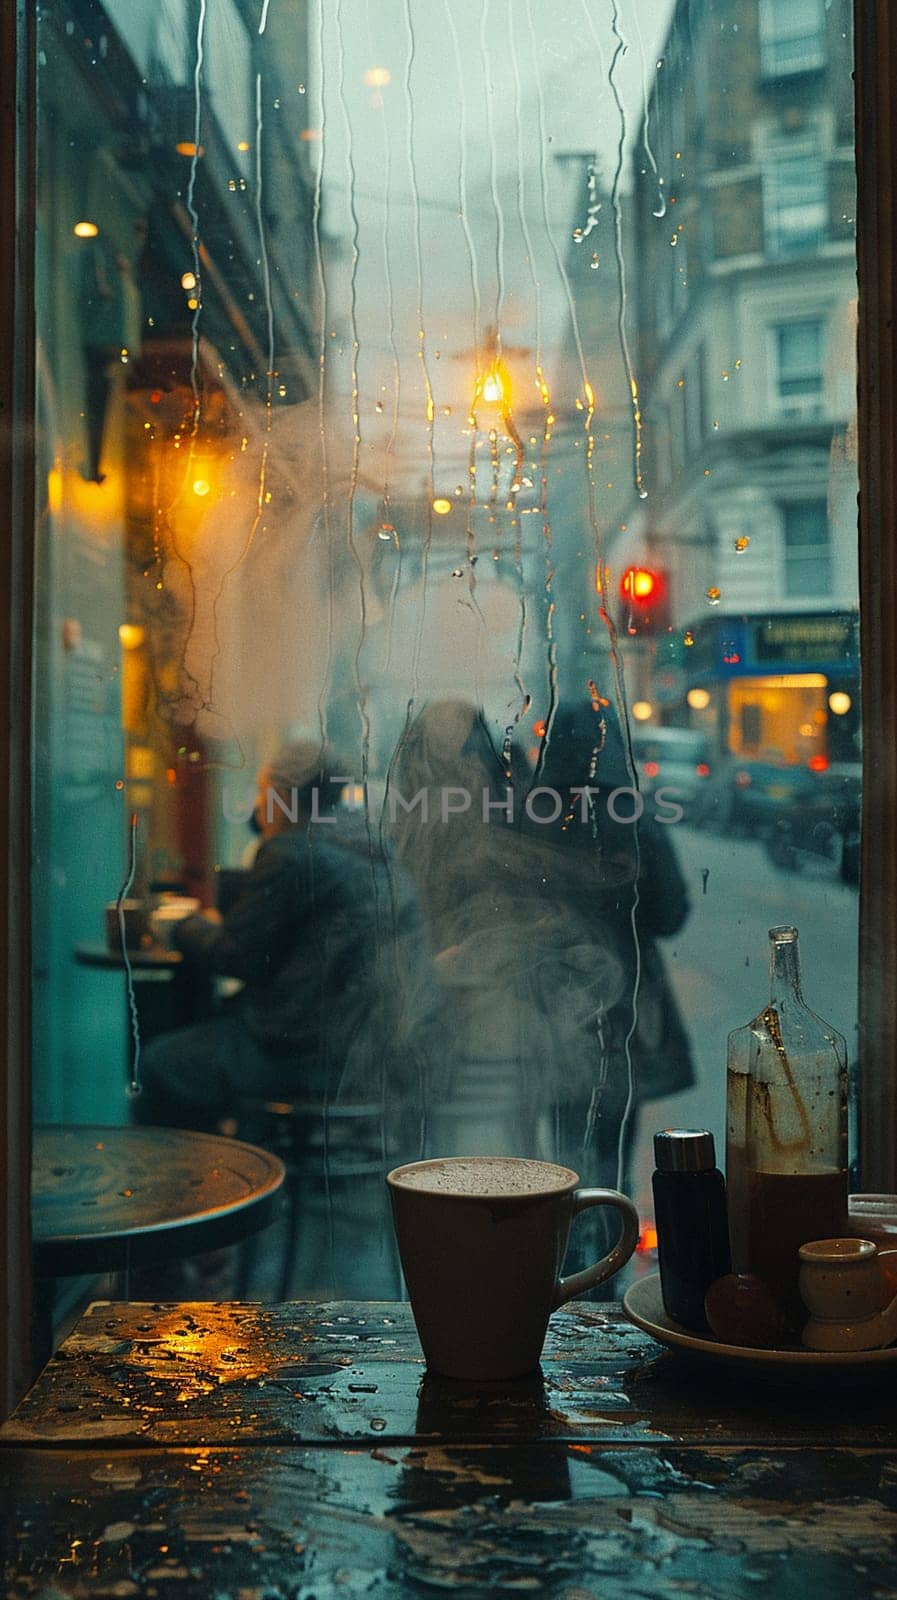 Cozy Coffee House Corner with Blurred Patrons and Steamy Mugs, The hazy warmth of the interior invites contemplation and community.